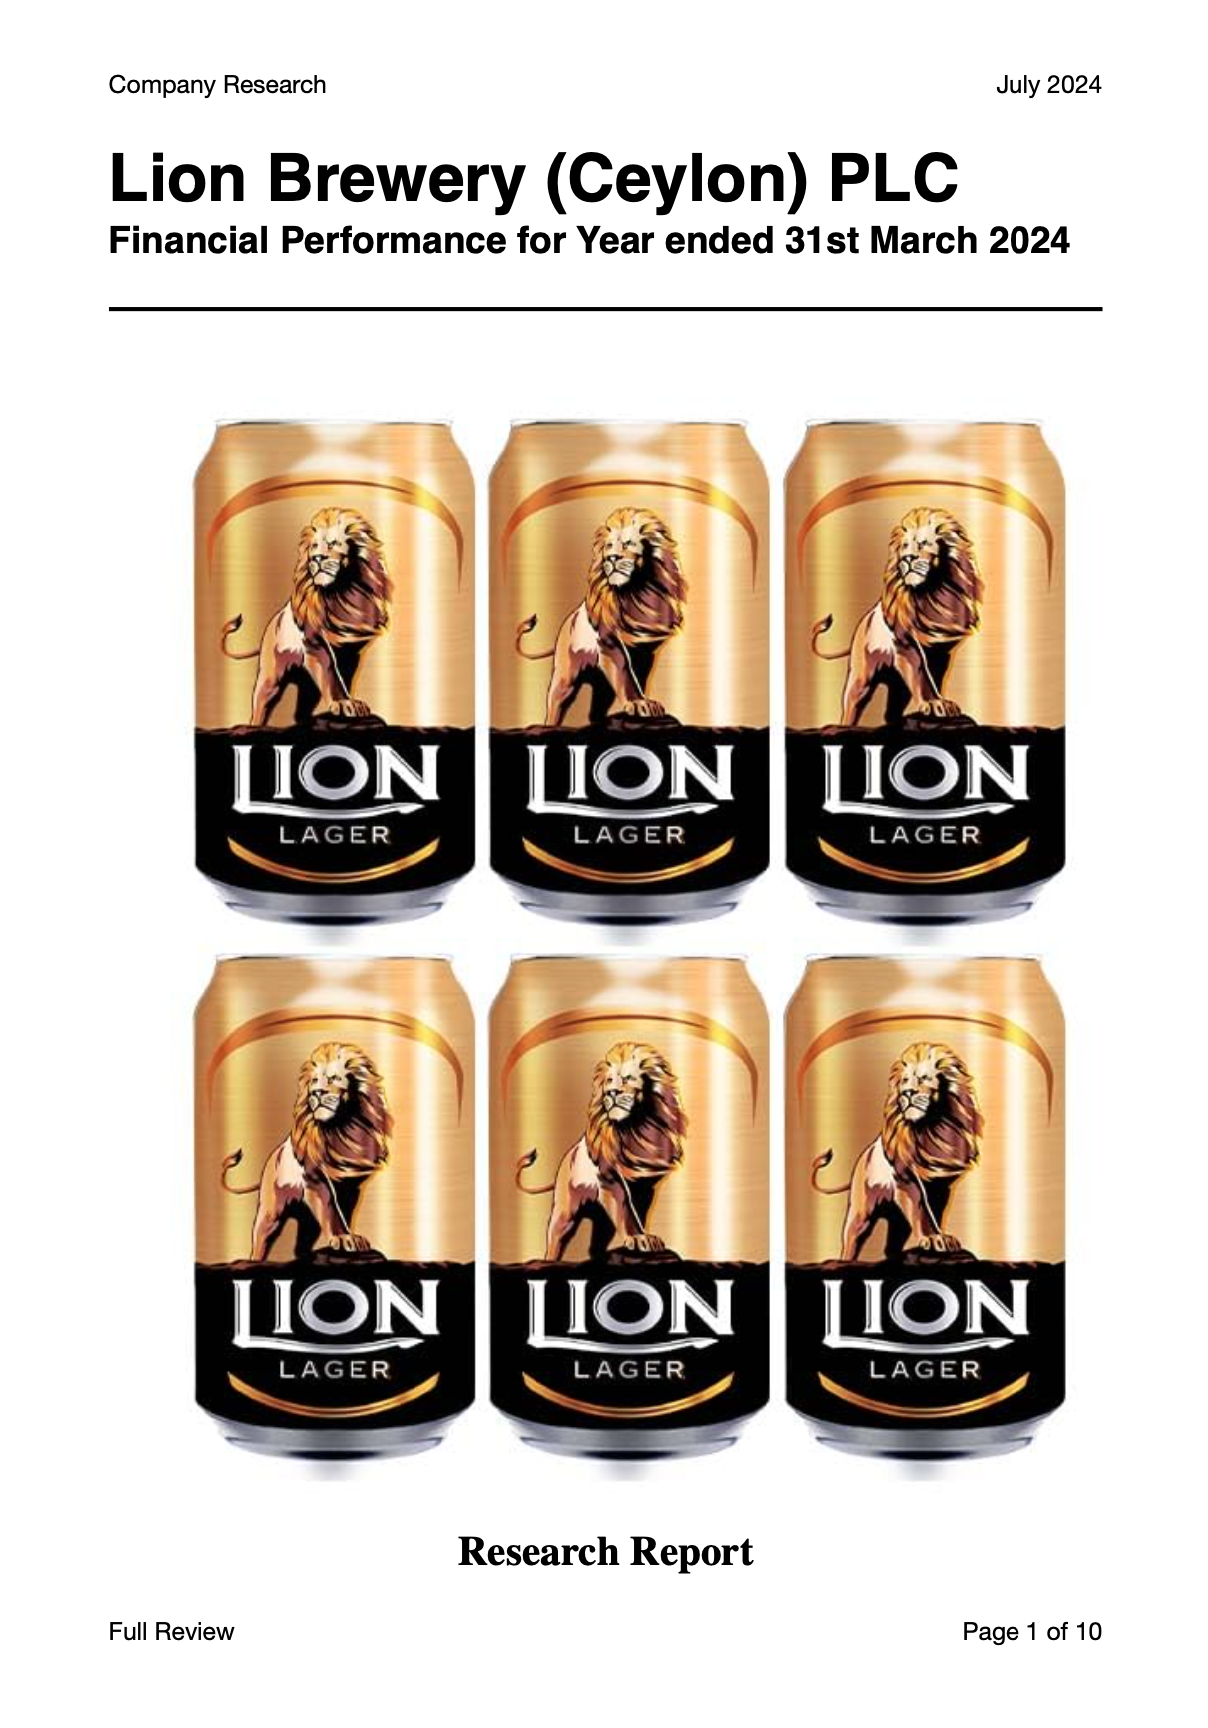 Lion Brewery PLC revenue increased by 16%